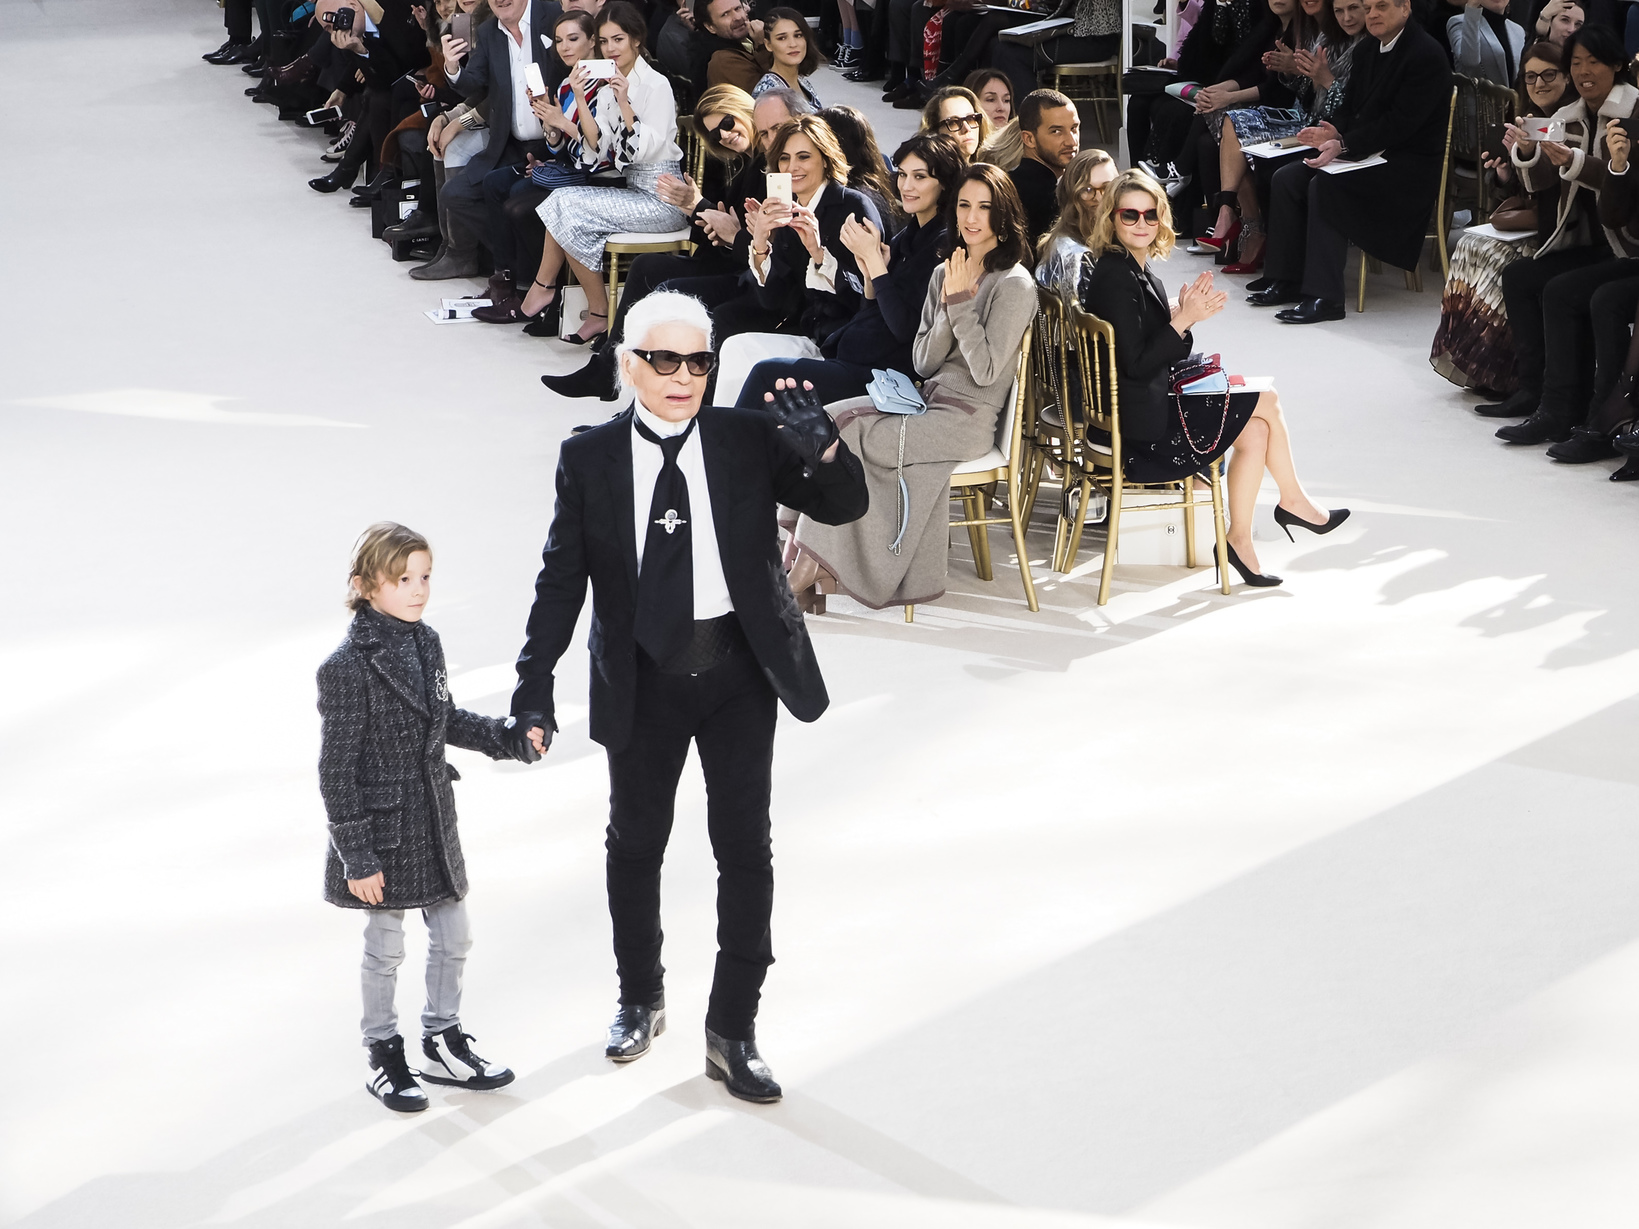 iconic fashion figure karl lagerfeld dies at the age of 85